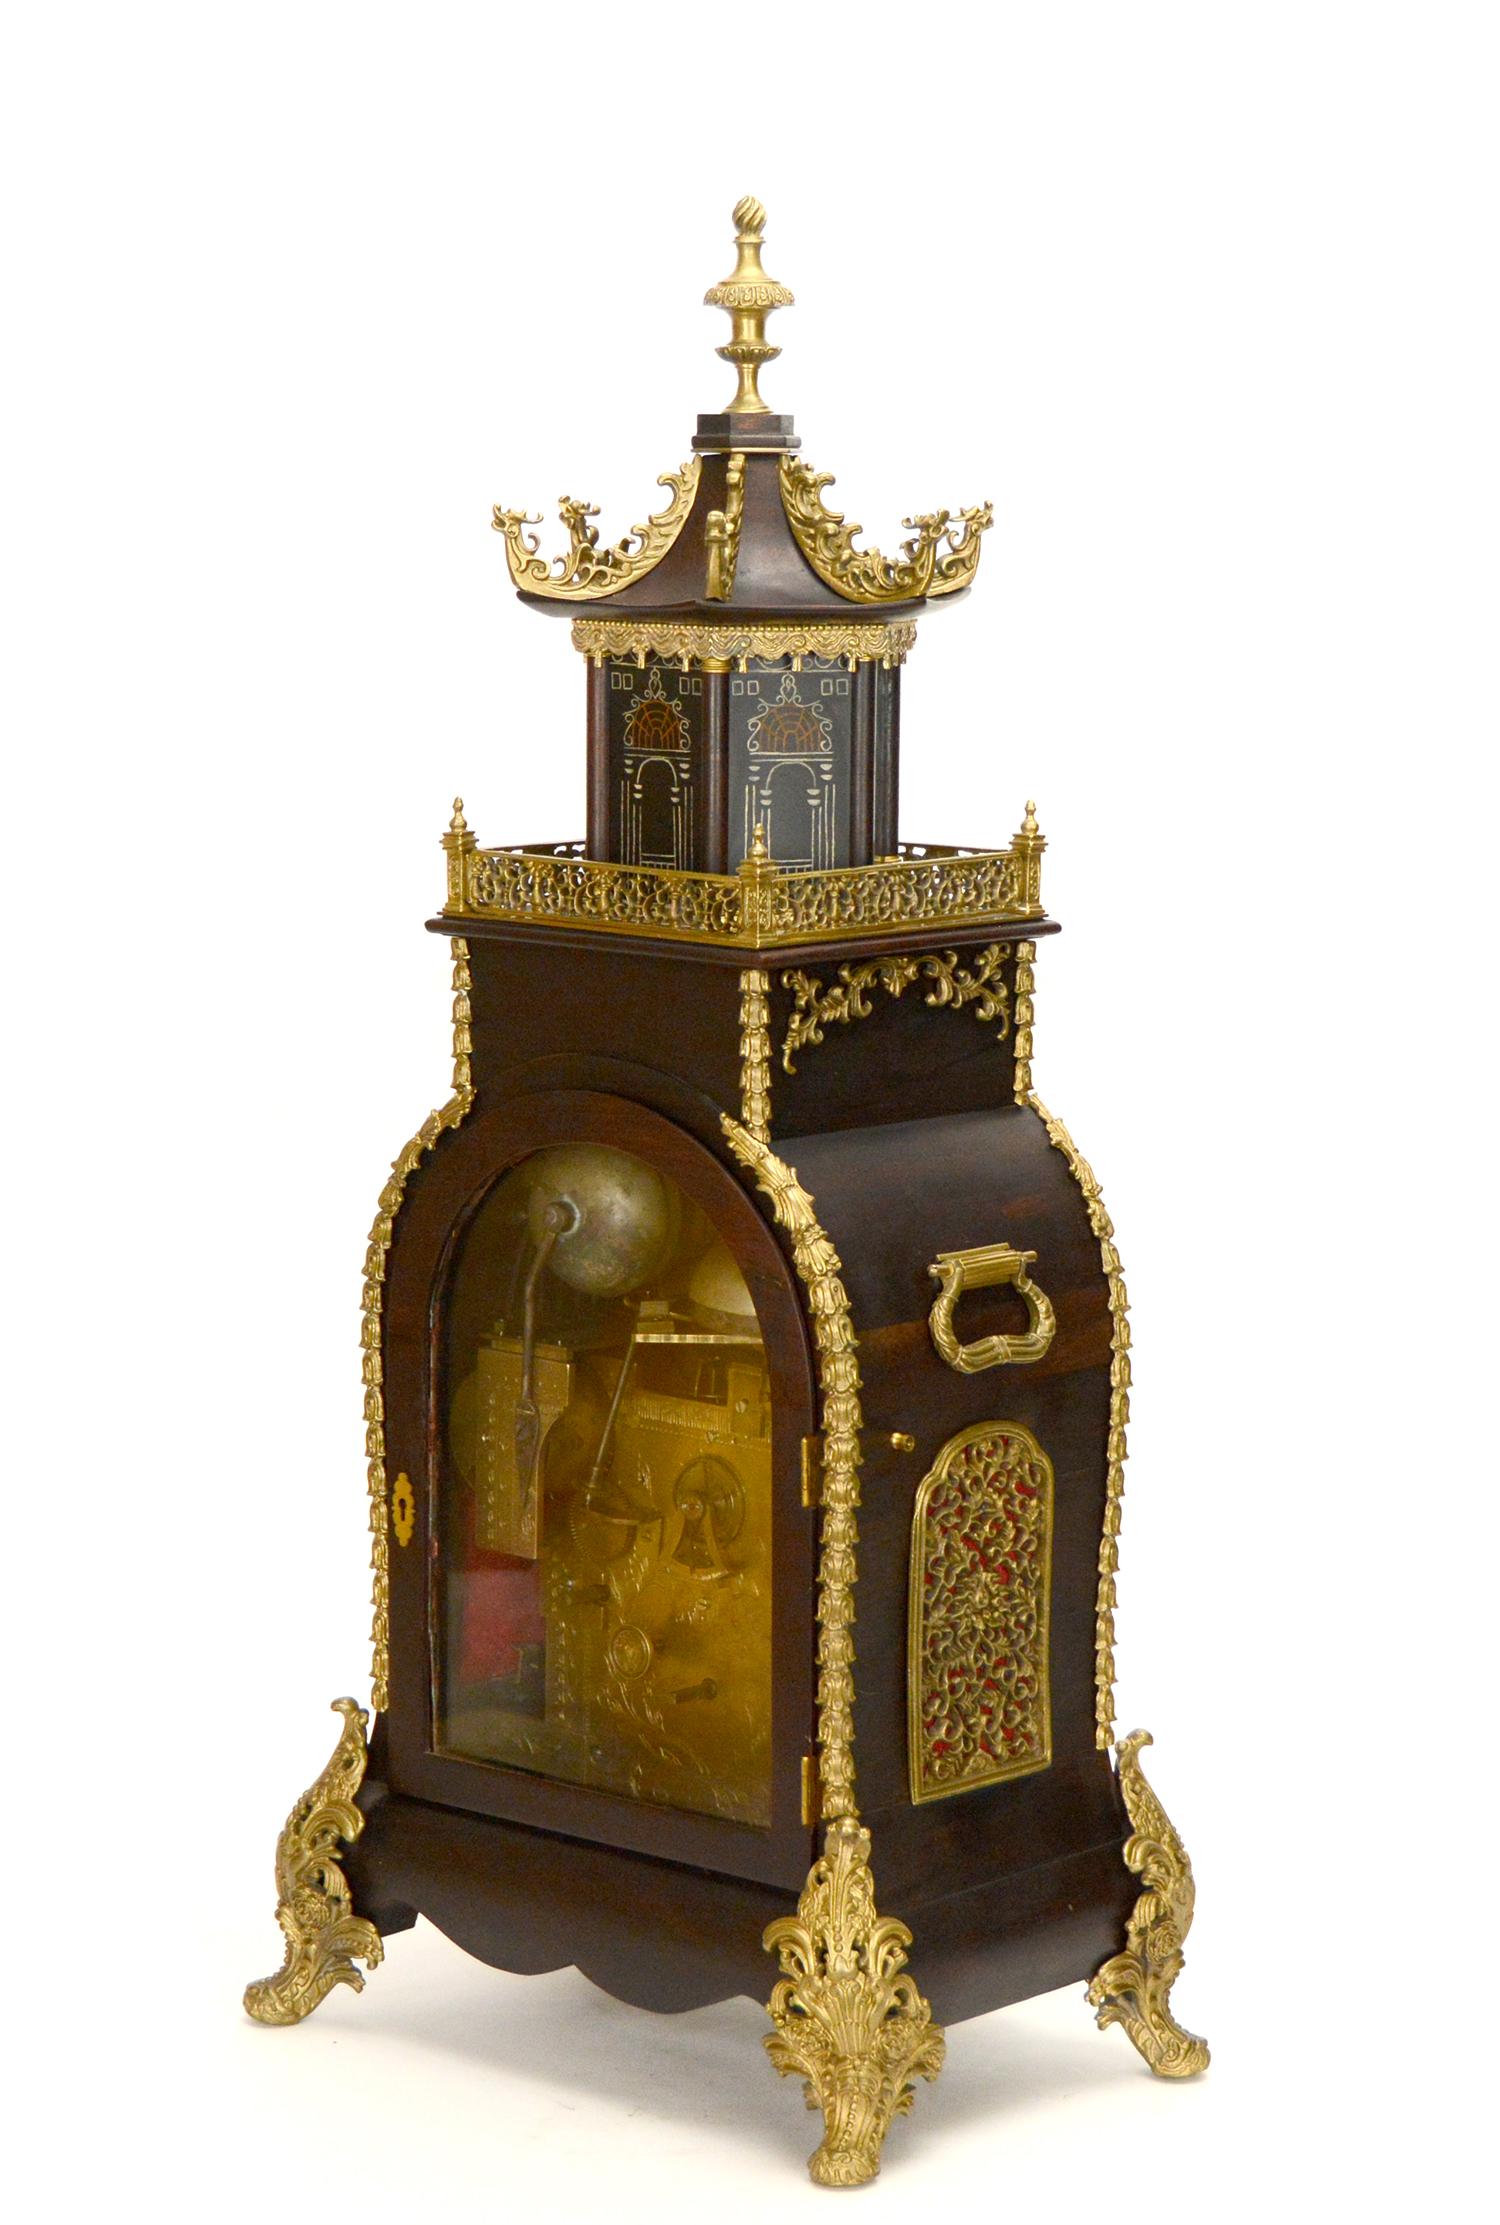 Vintage Chinese Canton Automaton Acrobat Musical Pagoda Waterfall Bracket Clock For Sale 4